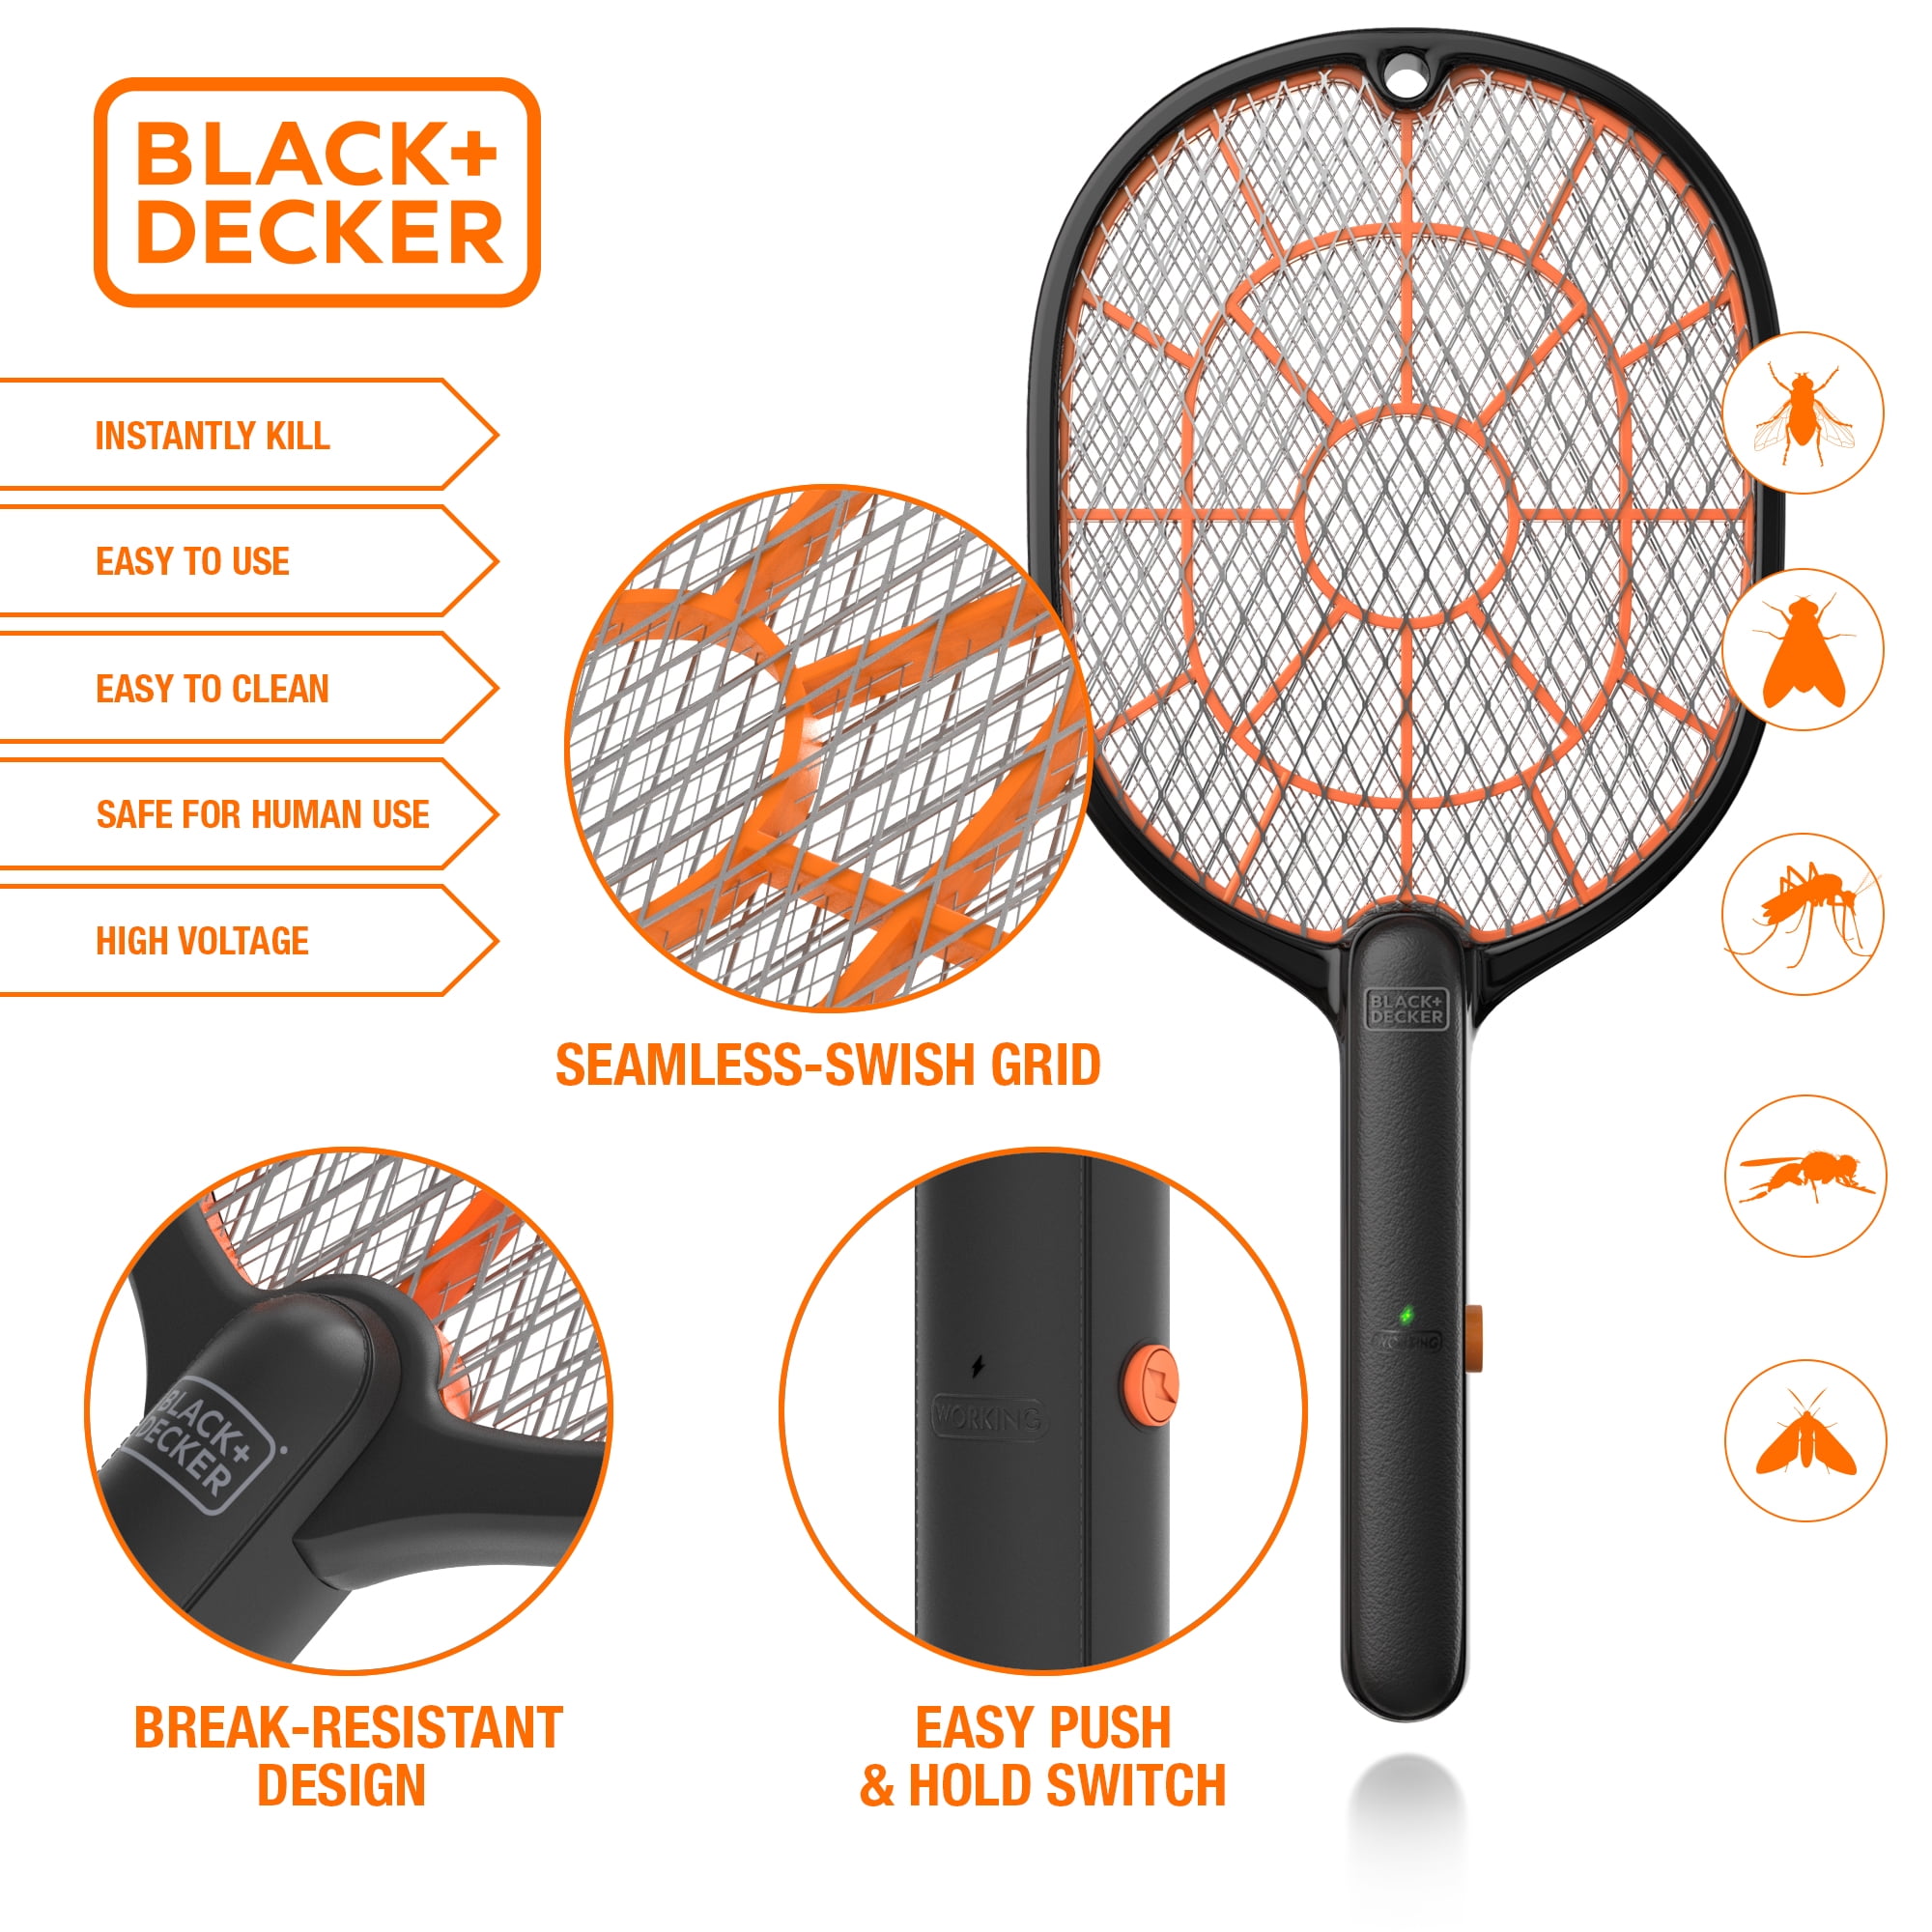 BLACK+DECKER Bug Zapper, Electric UV Insect Killer& Catcher for Flies,  Gnats, Mosquitoes, & Other Flying Pests, 6,000 Sq/Ft Coverage for Indoor/ Outdoor Use Includes Home, Kitchen & Other Areas